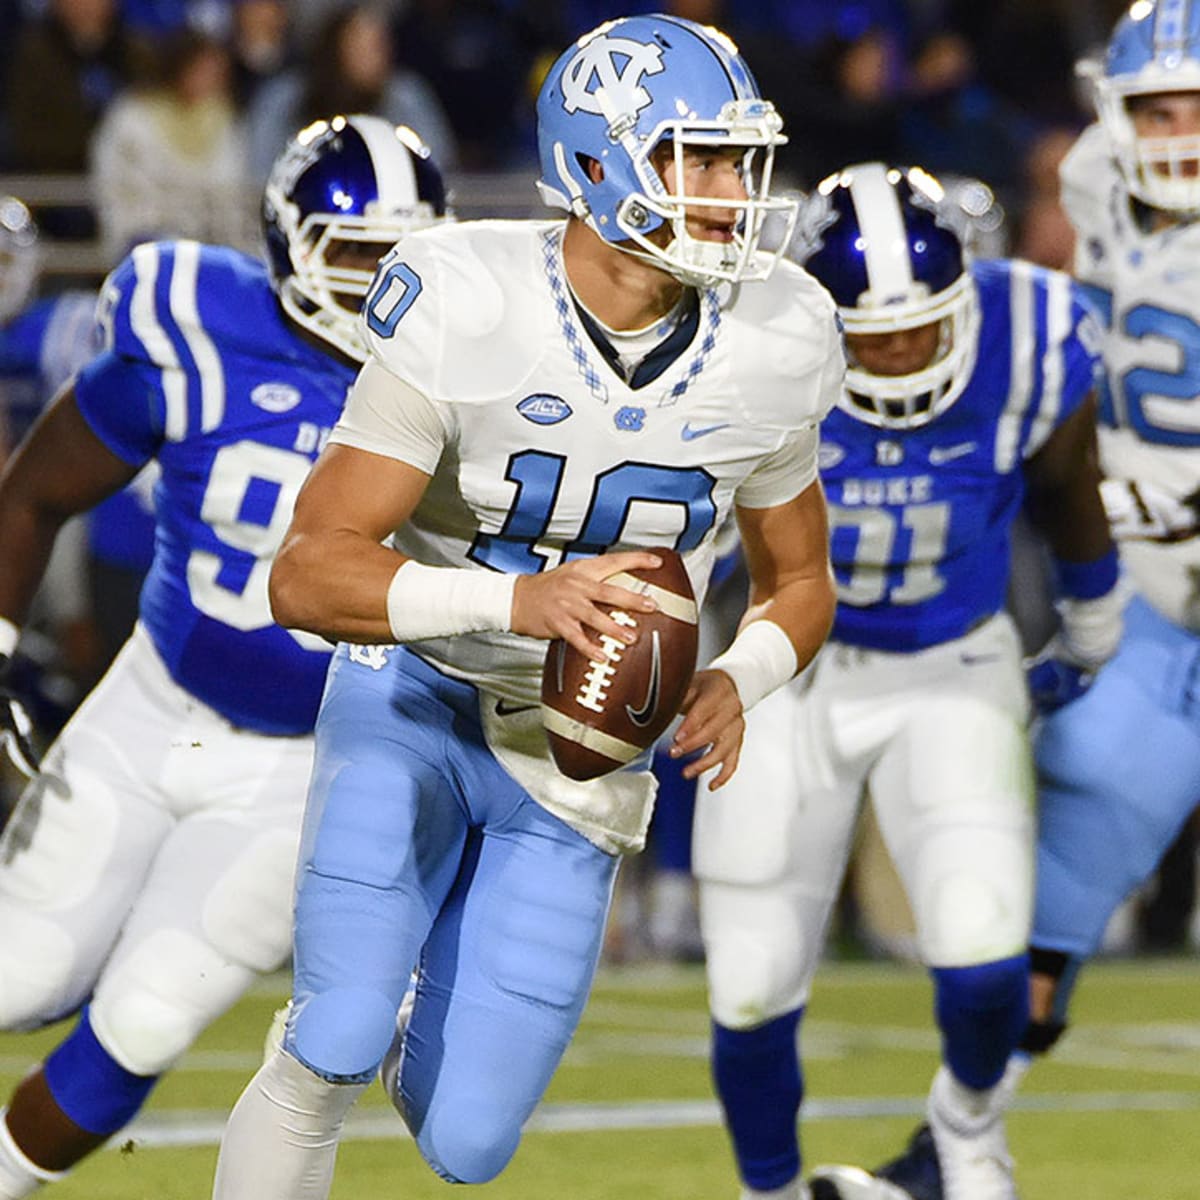 UNC Football: Mitch Trubisky Listed as Steelers QB1